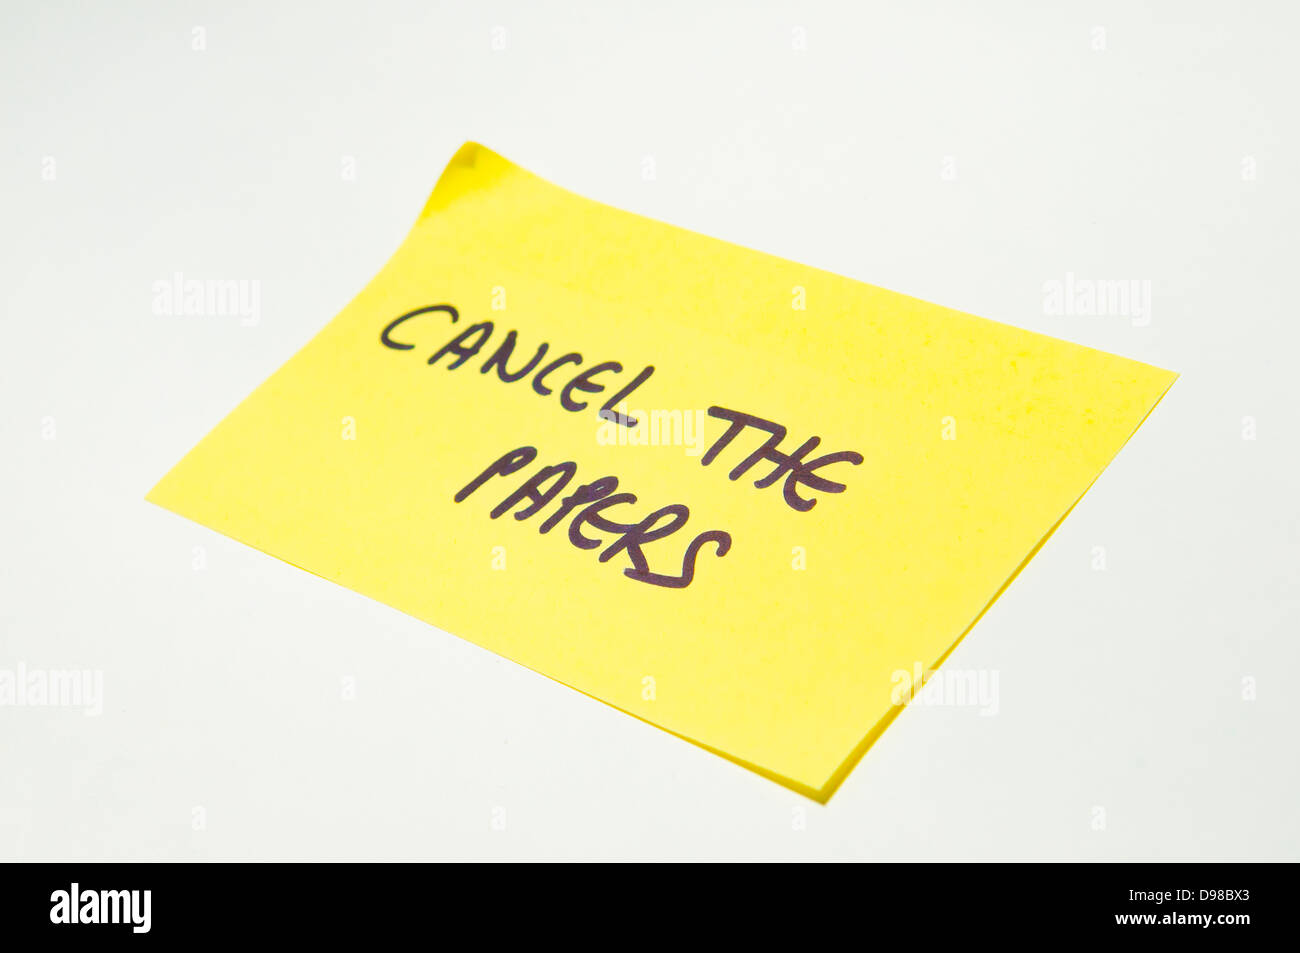 'Cancel the papers' written on a yellow post it note Stock Photo